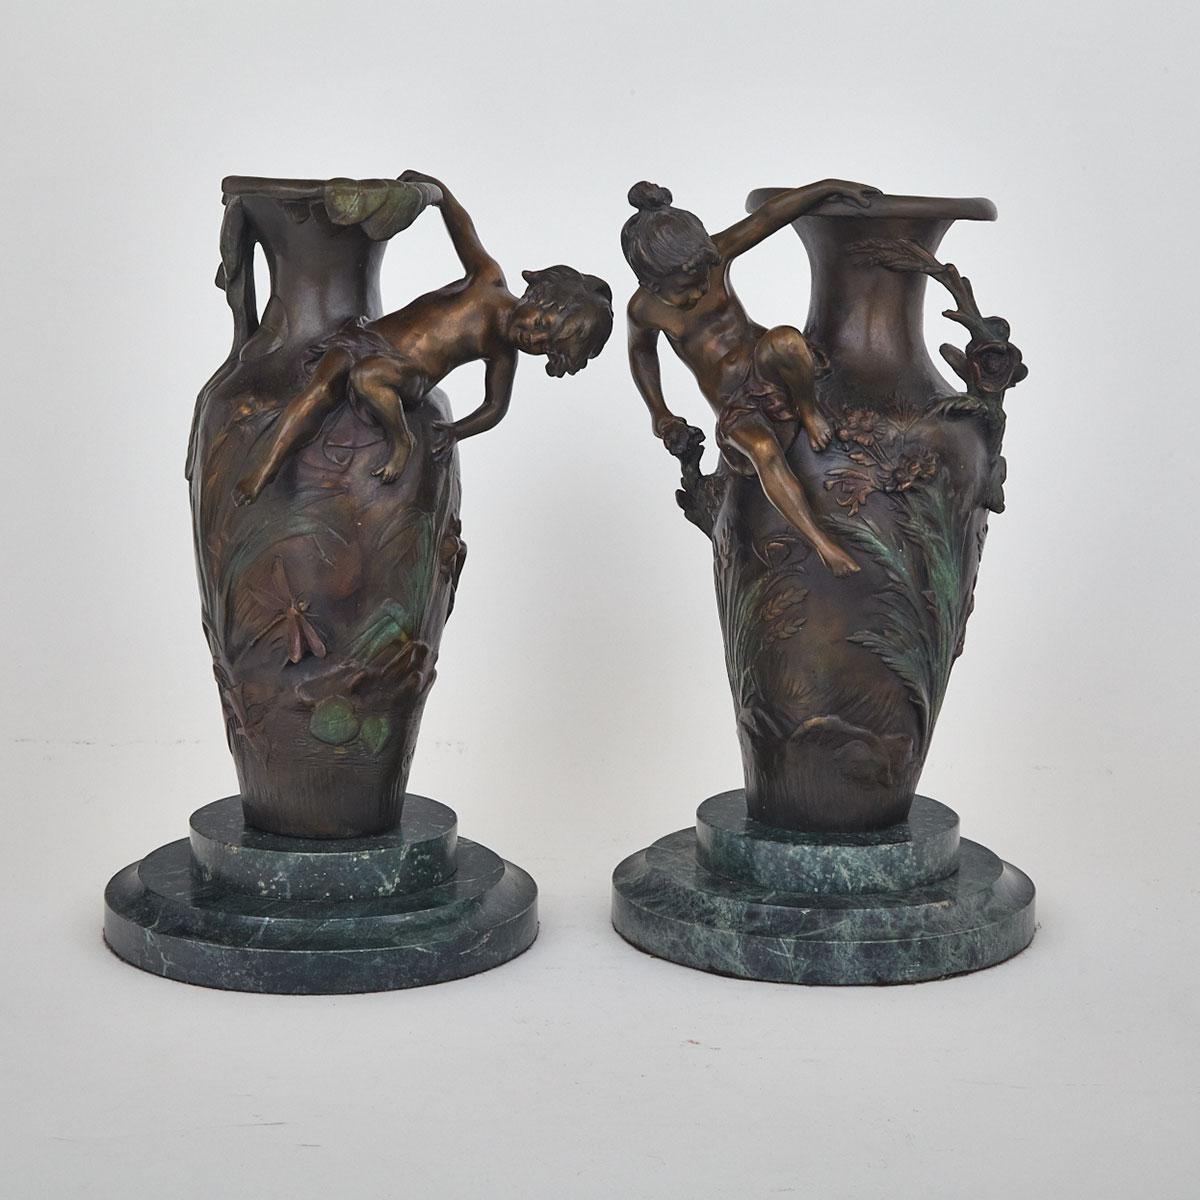 Pair of French Patinated Bronze Figural Vases after Auguste Moreau, 20th century